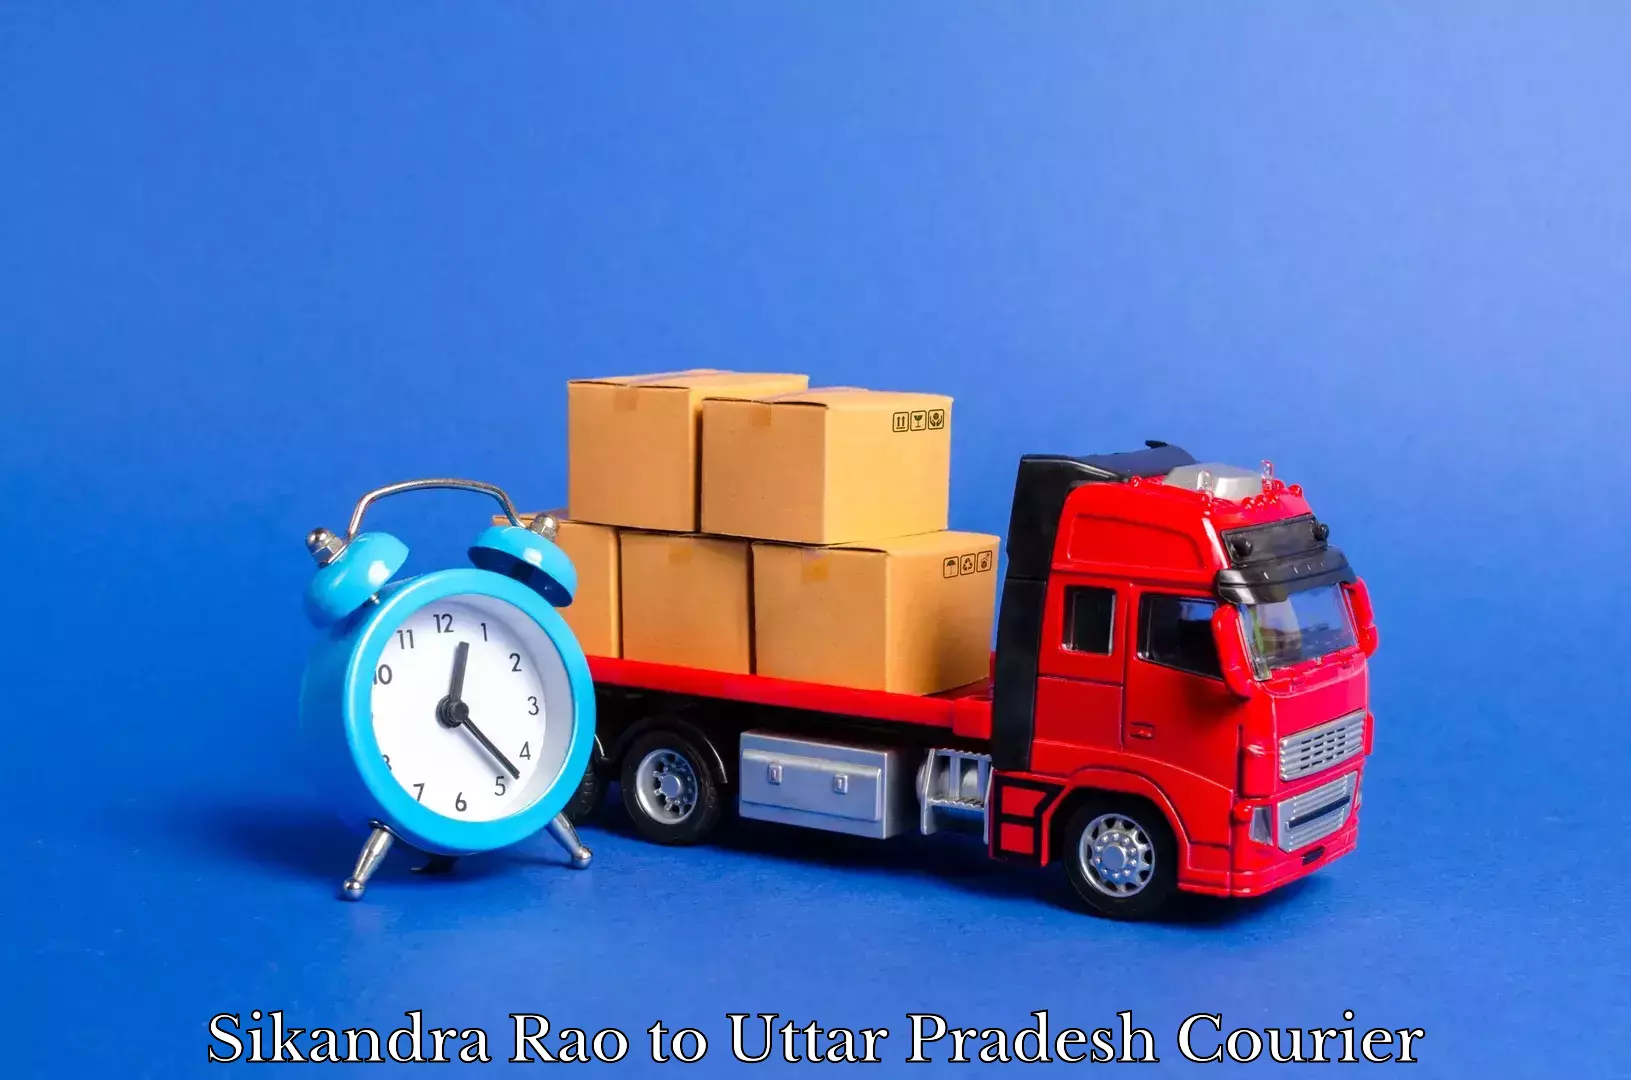 Efficient relocation services in Sikandra Rao to Rampur Maniharan